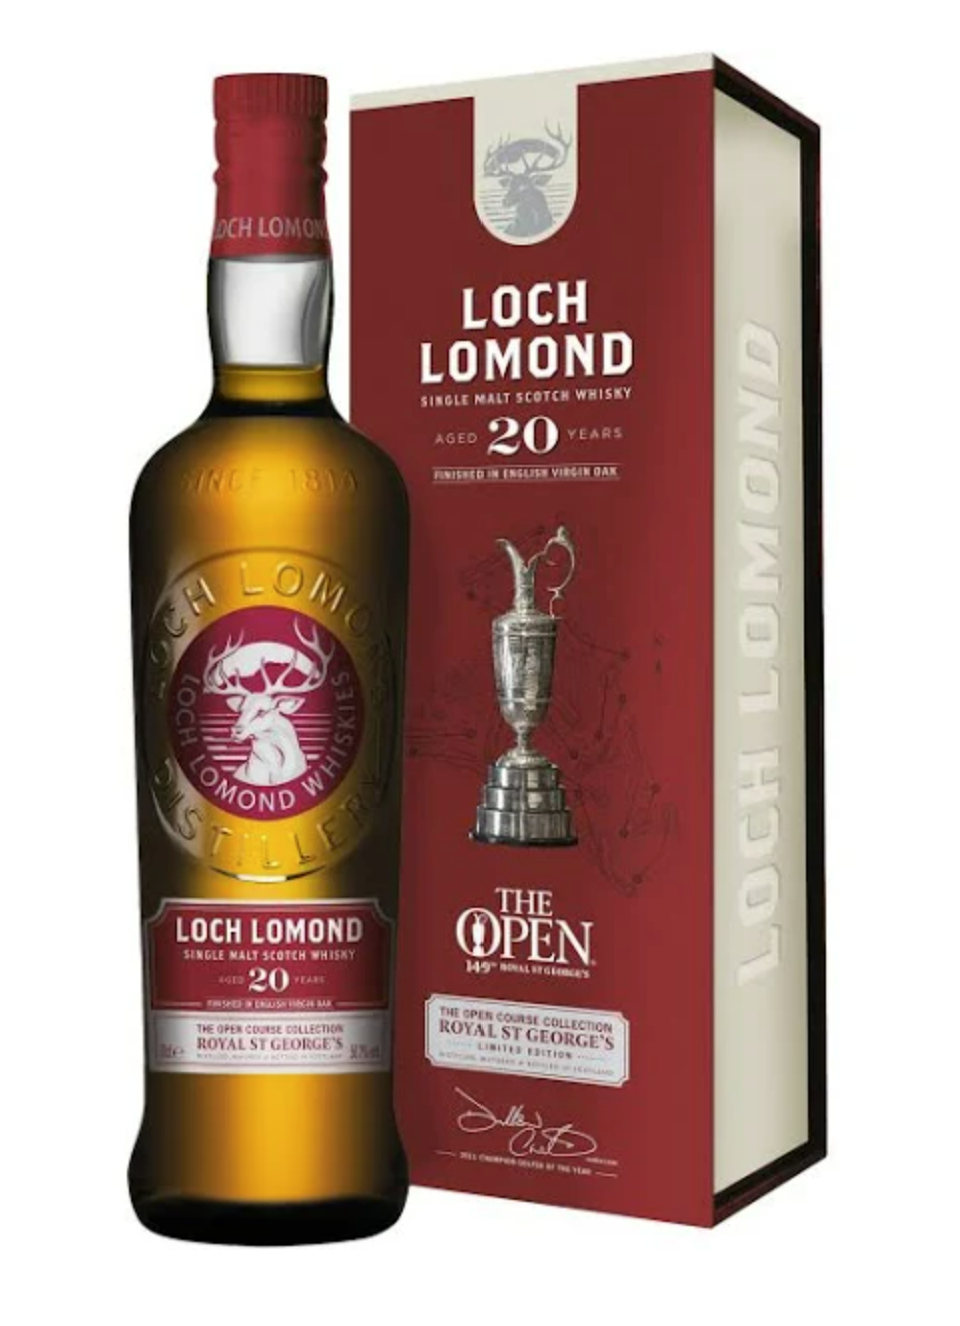 Loch Lomond The Open Course Collection 20 Years - 750ml